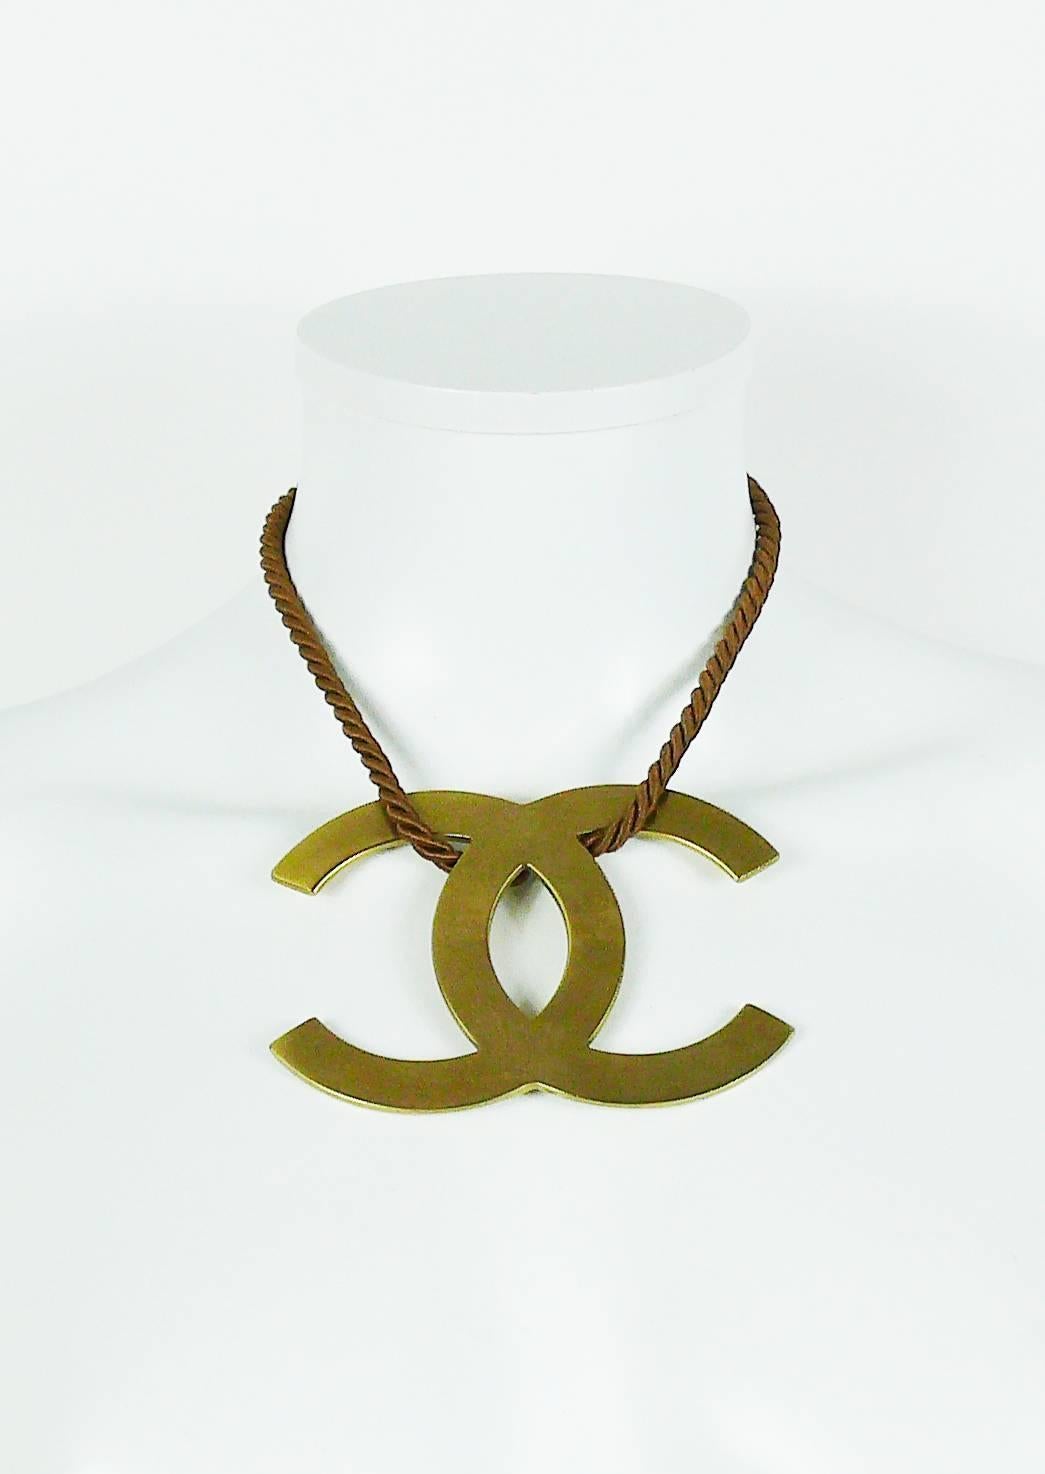 CHANEL runway jumbo brushed pale gold tone CC logo necklace.

Brown braided rope.
Hook clasp closure.

Ready-to-wear Spring/Summer 2005.

Similar necklace sold at DROUOT Paris - LE BRECH & ASSOCIES - July 9, 2015 - Lot